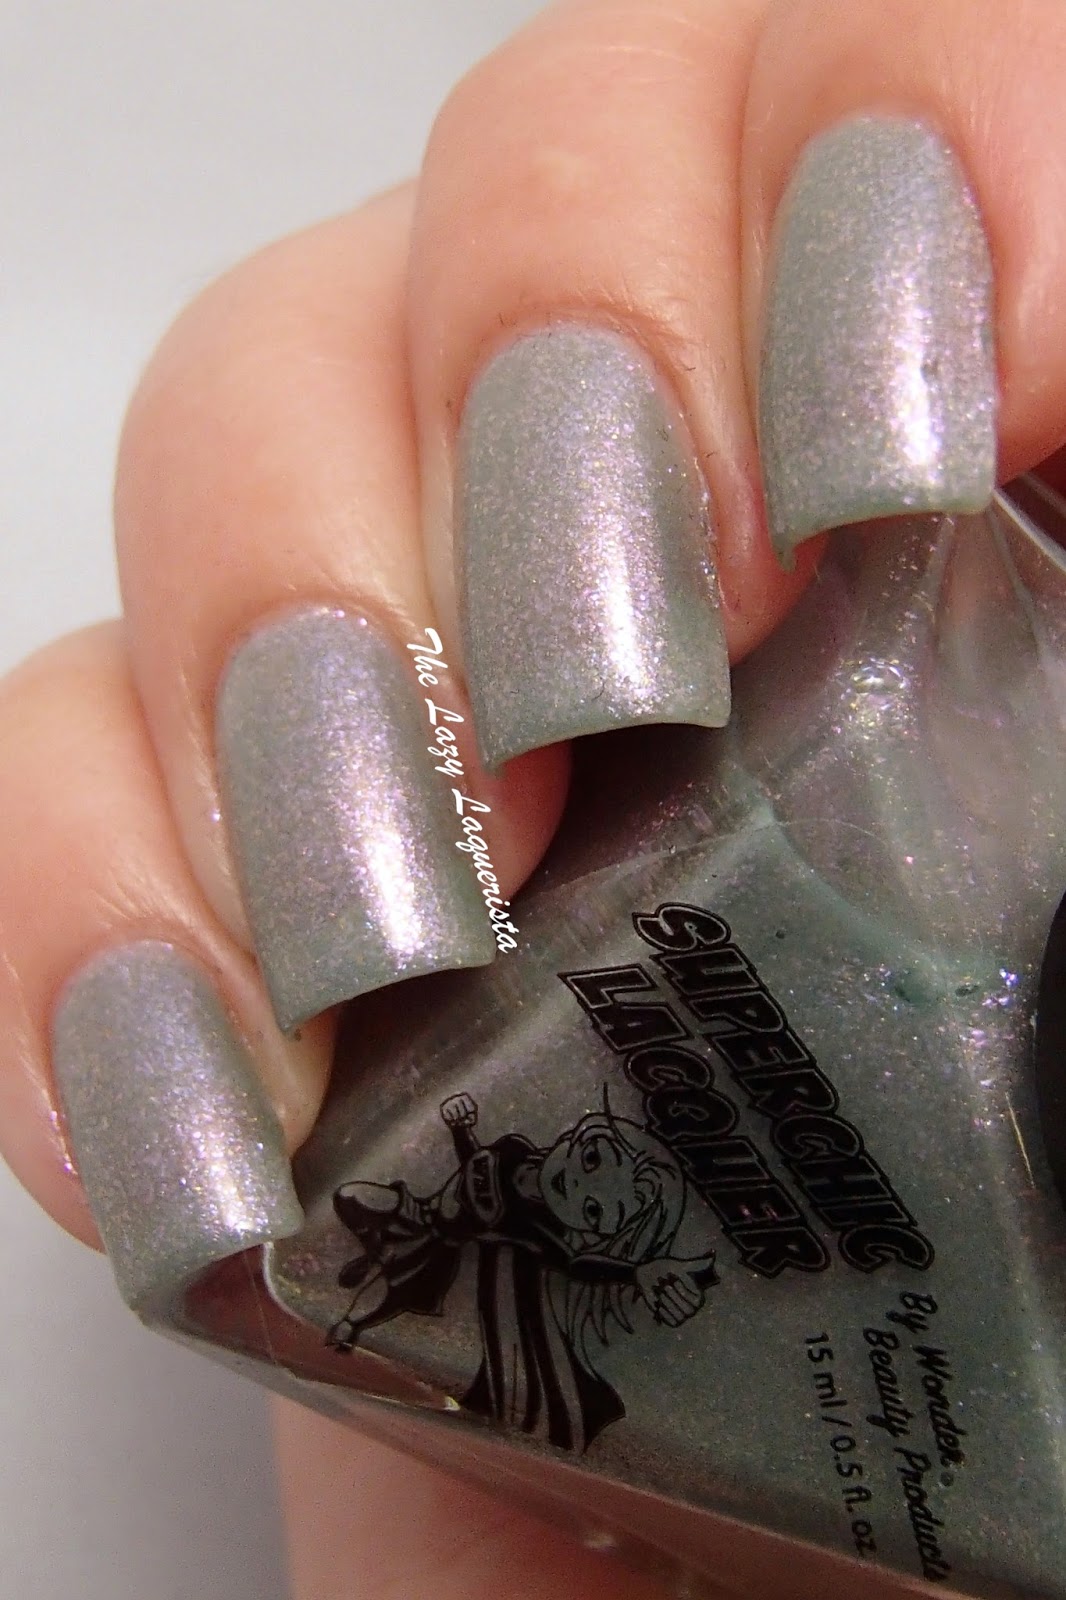 Superchic Lacquer Gauntlet Girl